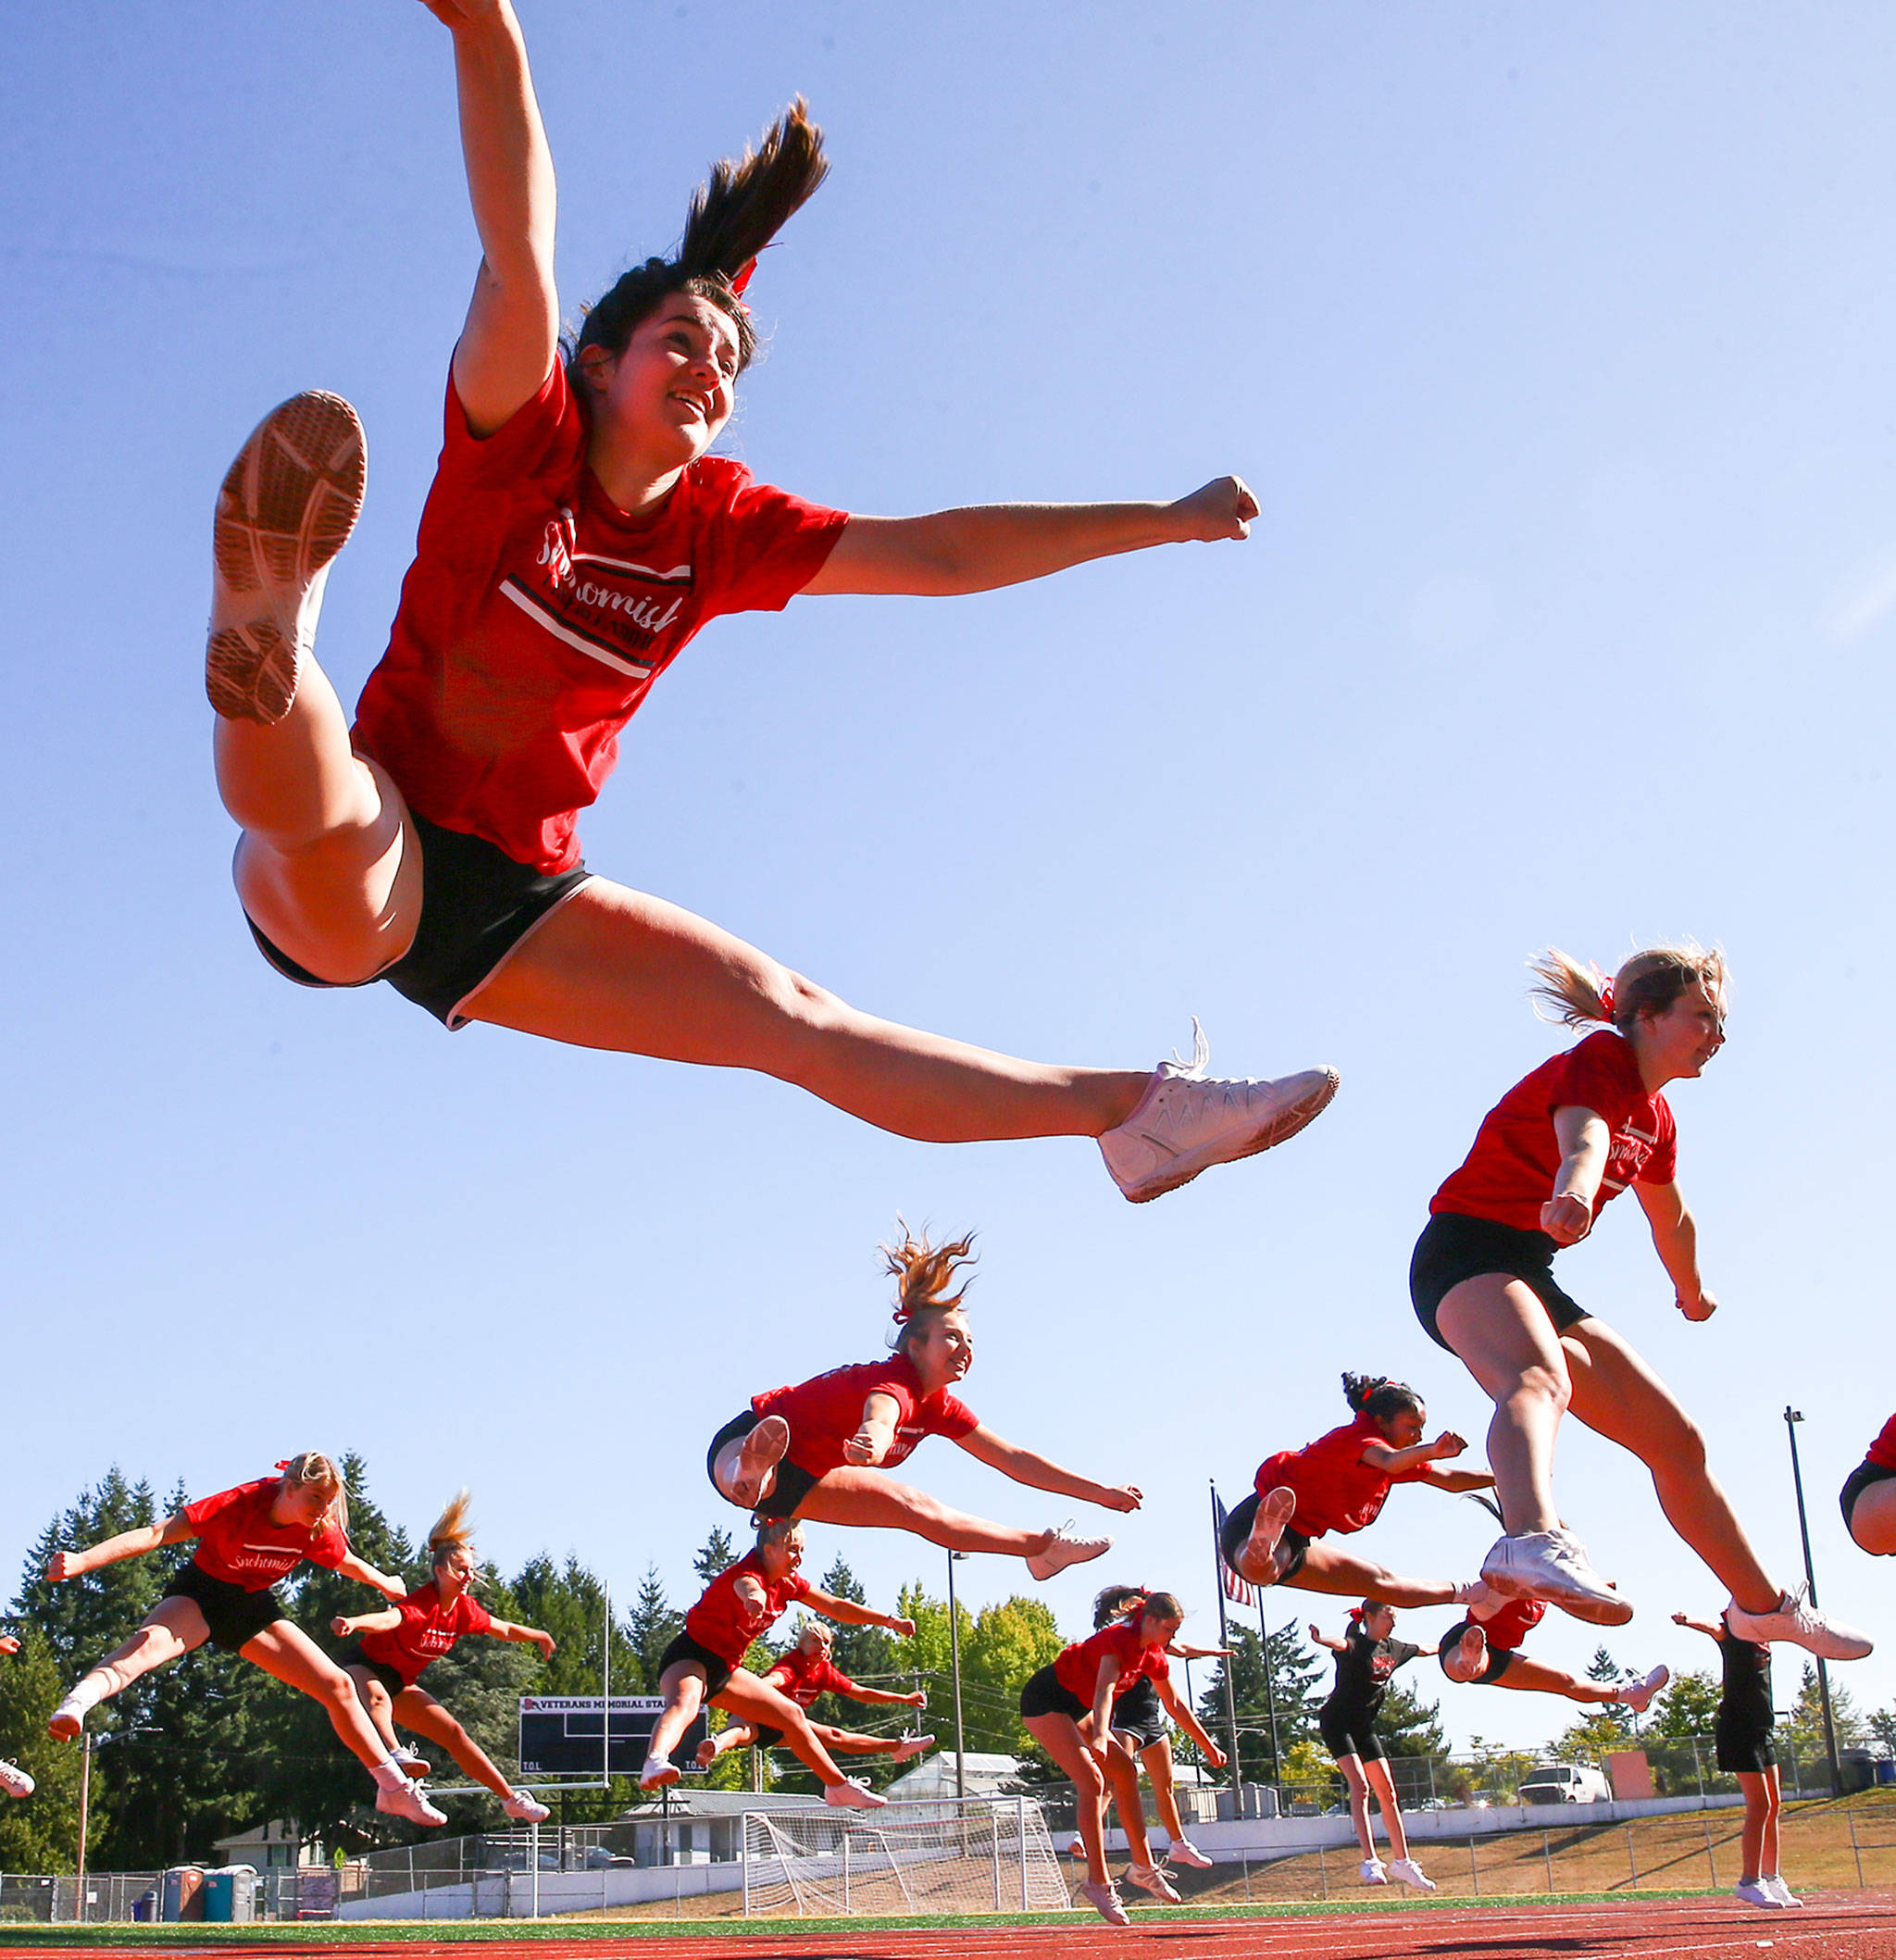 The 2019-20 Snohomish High cheerleaders practice at Veterans Memorial Stadium in Snohomish on Aug. 27. (Kevin Clark / The Herald)